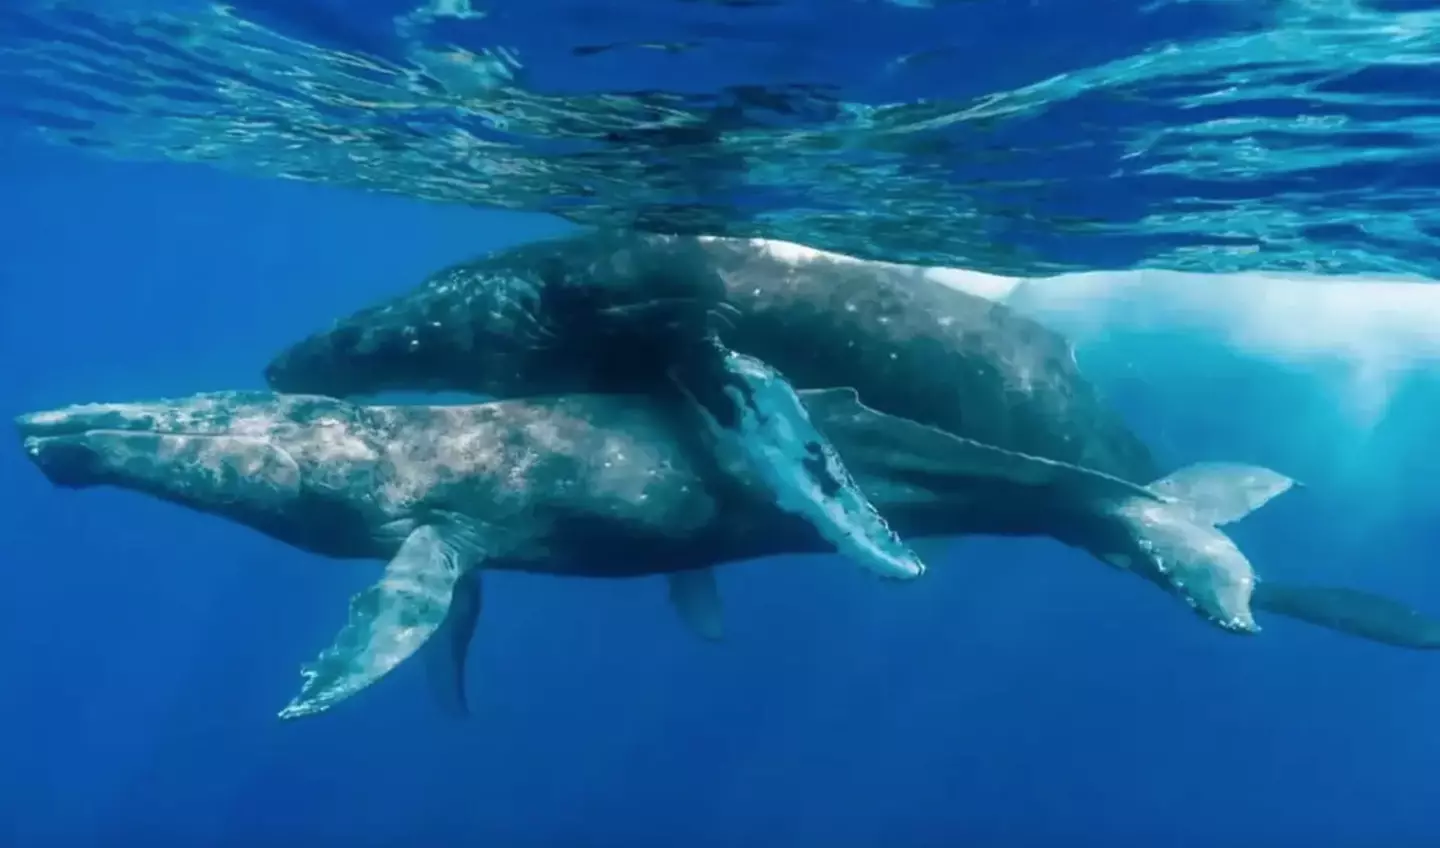 Two whales were caught on camera getting down and dirty in never-before-seen images.